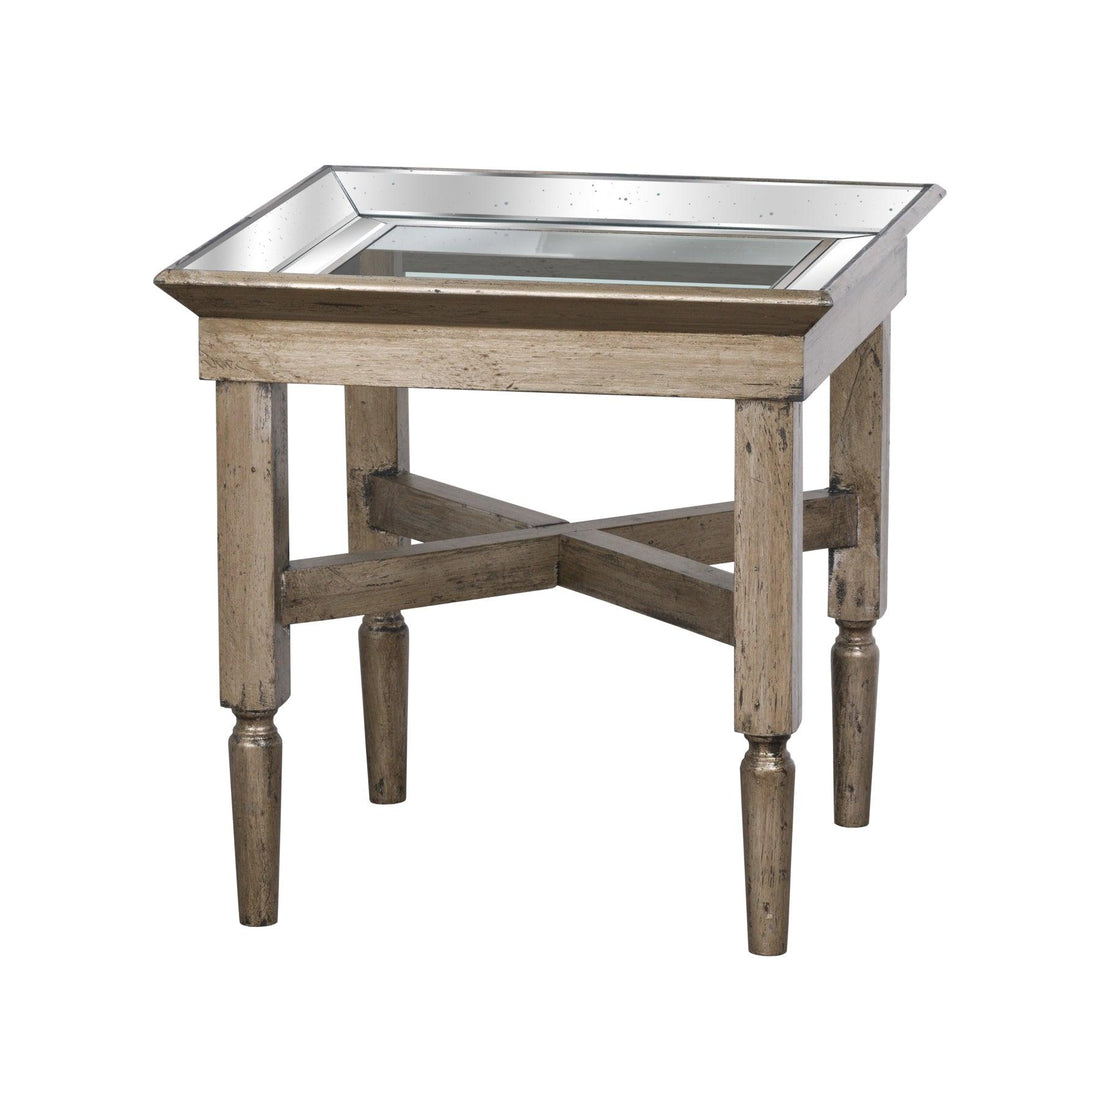 Astor Glass Side Table With Mirror Detailing - £299.95 - Furniture > Tables > Side Tables 